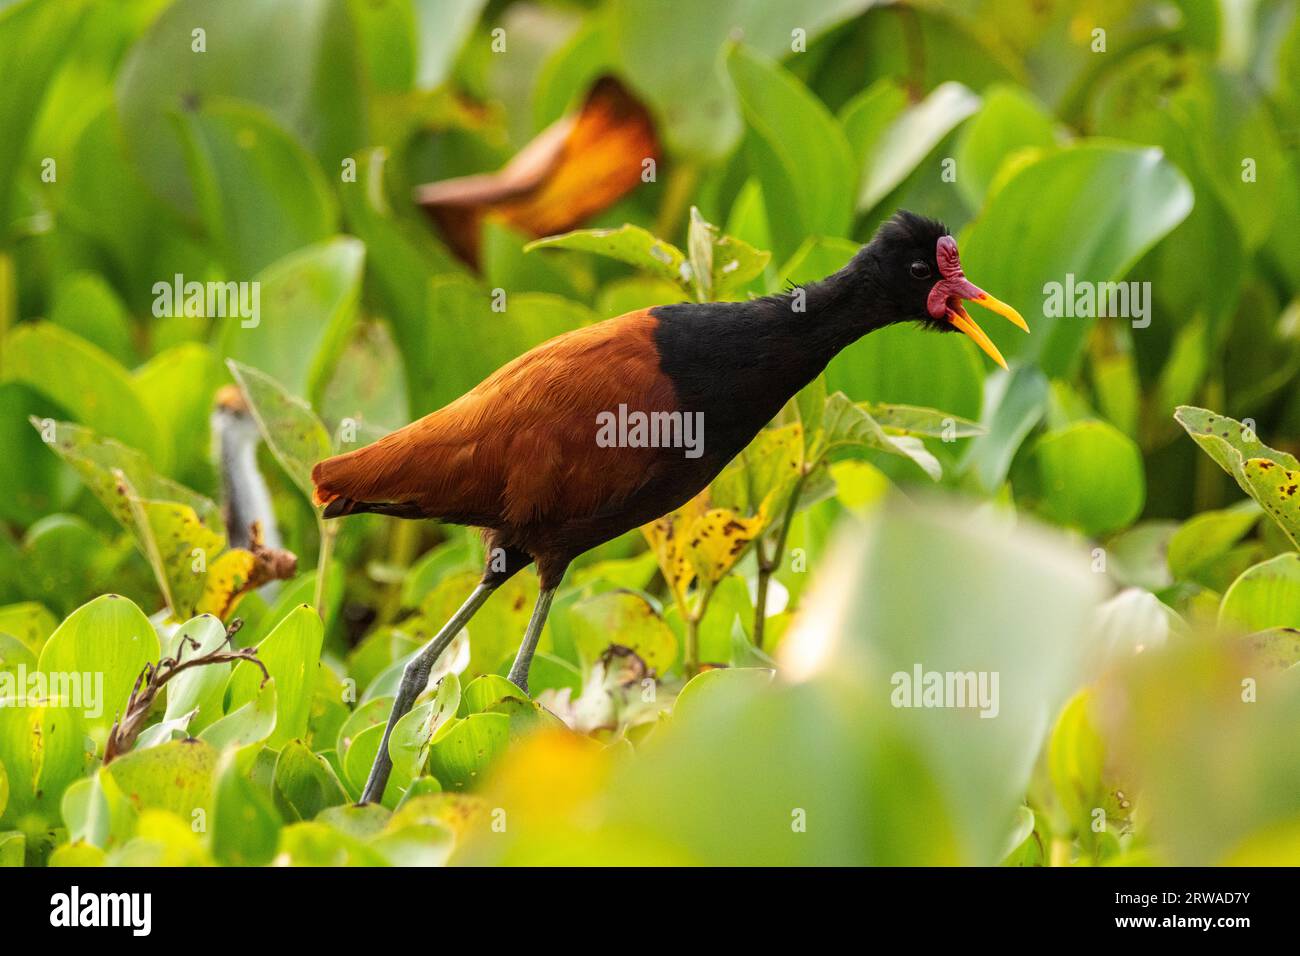 Beautiful view to Wattled Jacana bird on green floating vegetation in the Pantanal of Poconé, Mato Grosso State, Brazil Stock Photo